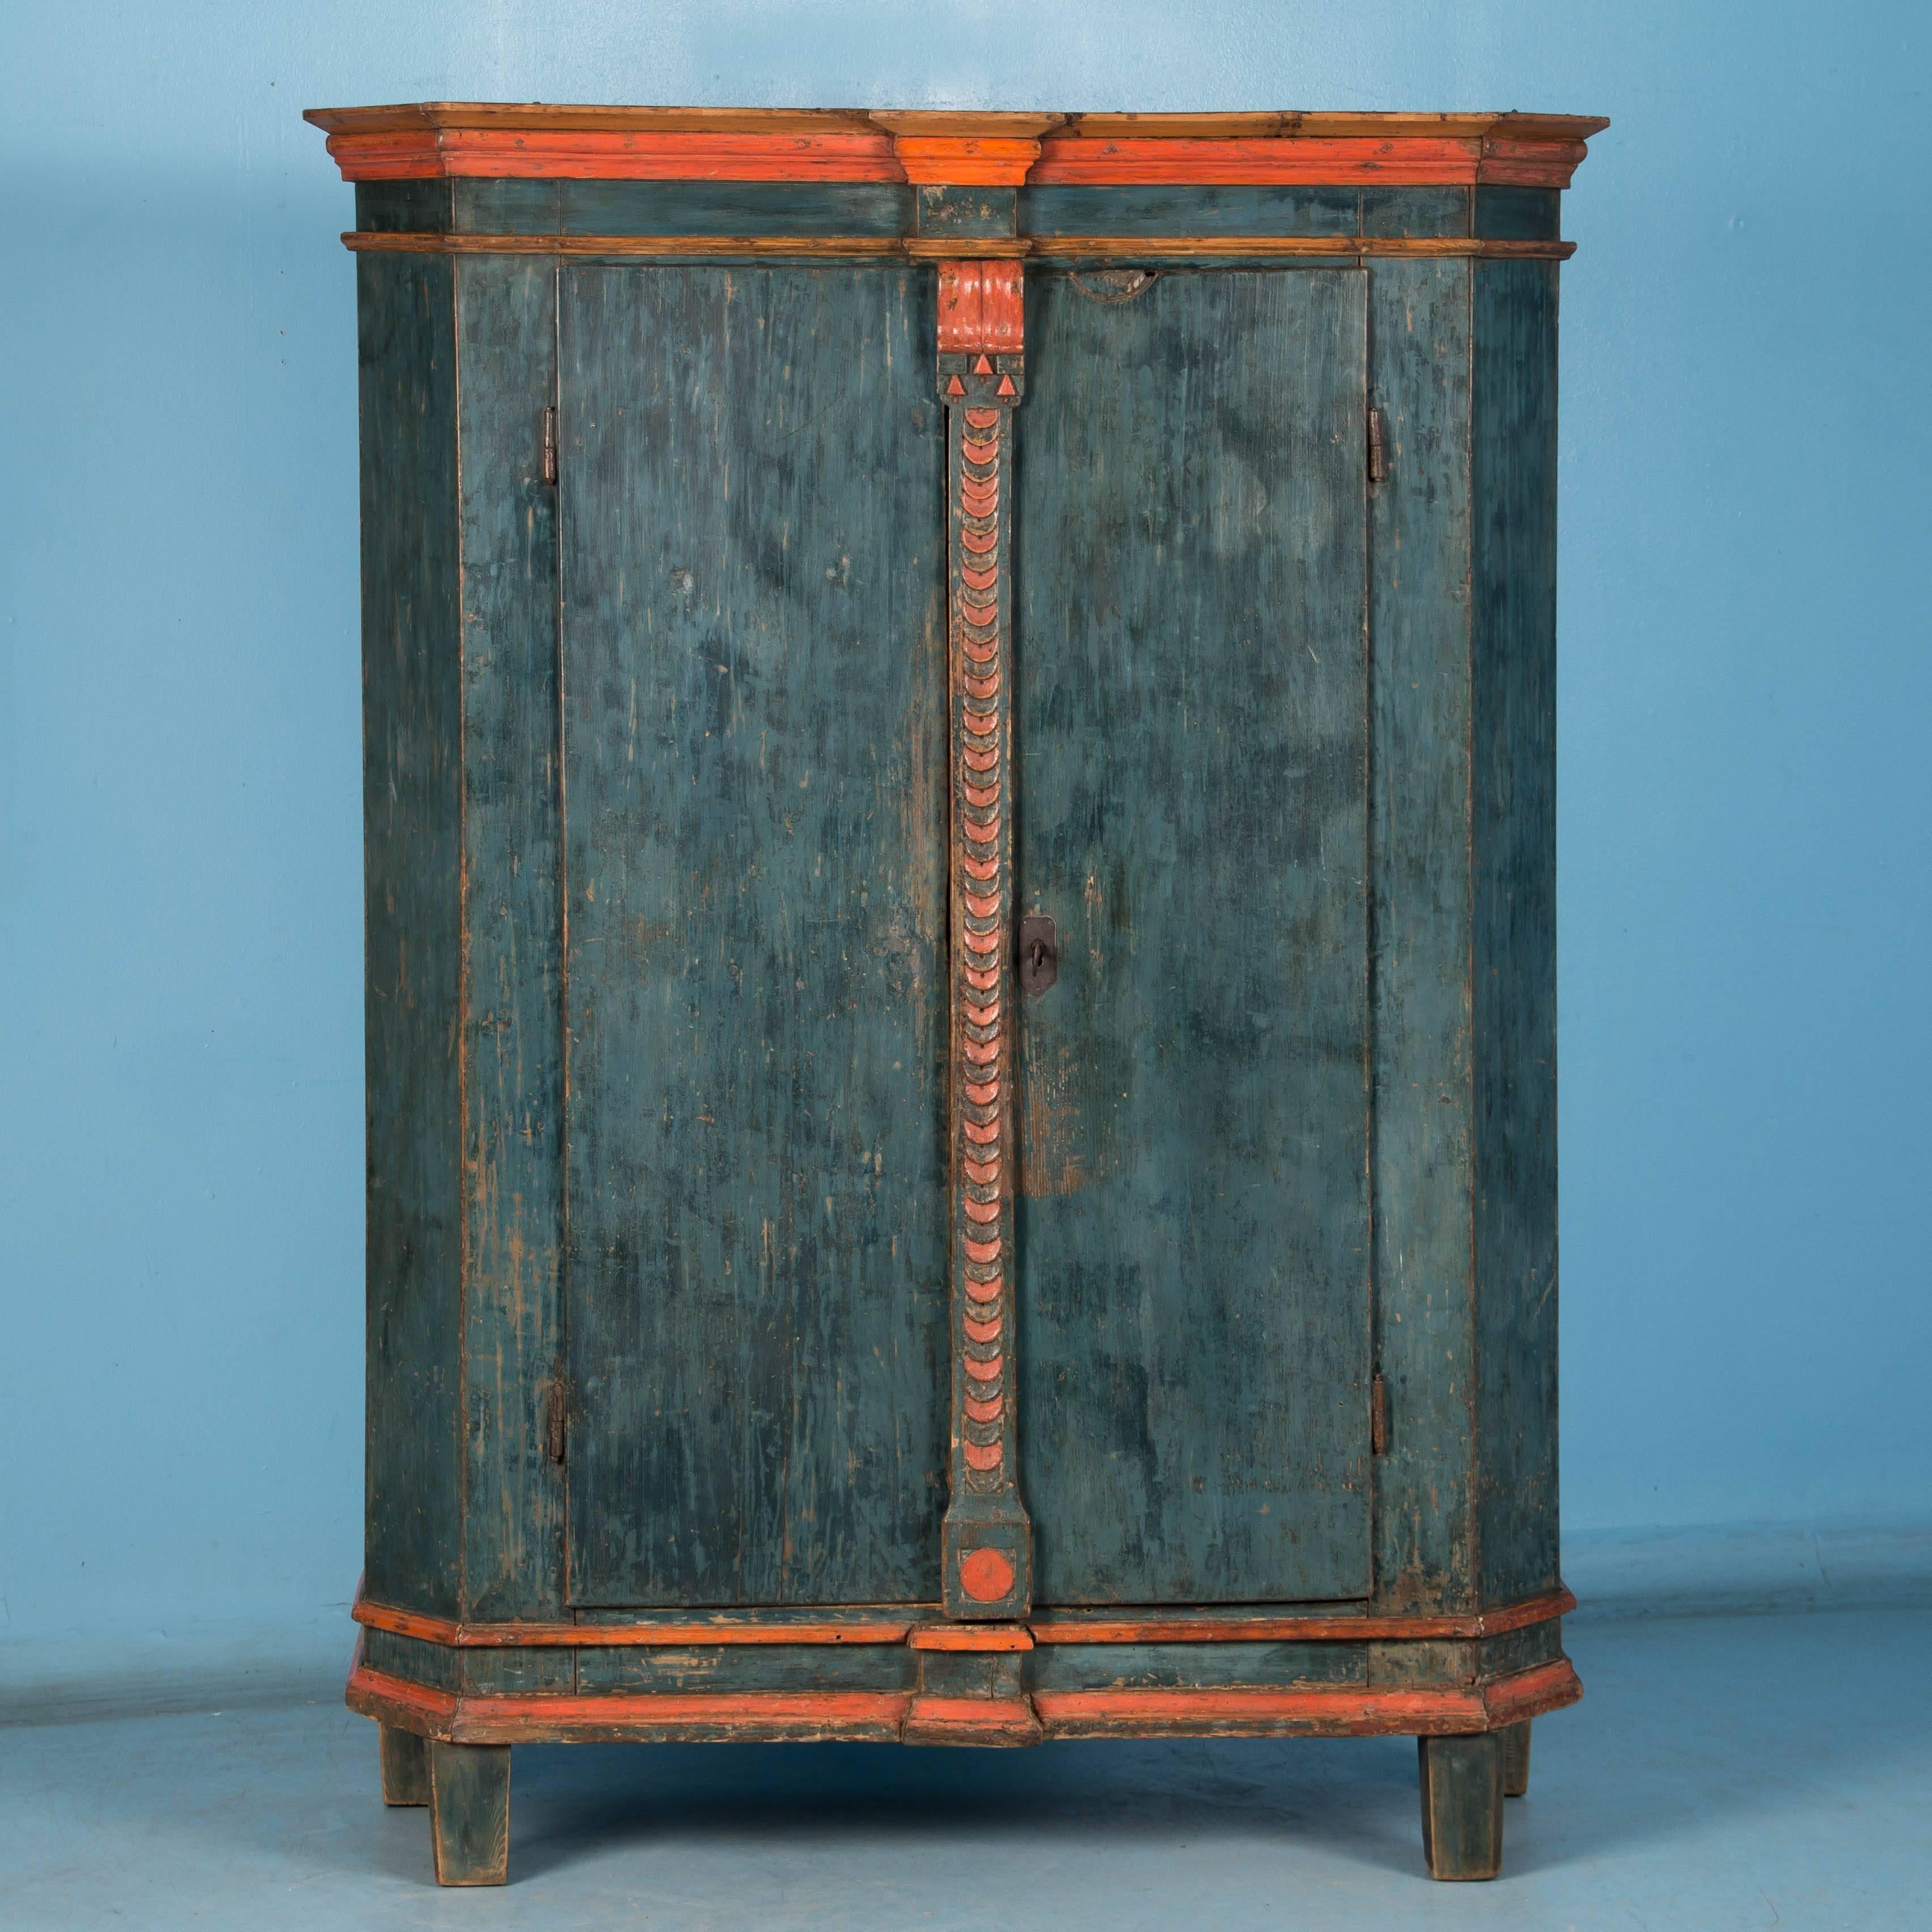 The wonderful lightly distressed blue paint and red trim are all original on this beautiful, late 18th century pine armoire from Sweden. The large interior is open, however shelves and or a hanging rod can easily be installed for a fee if requested.